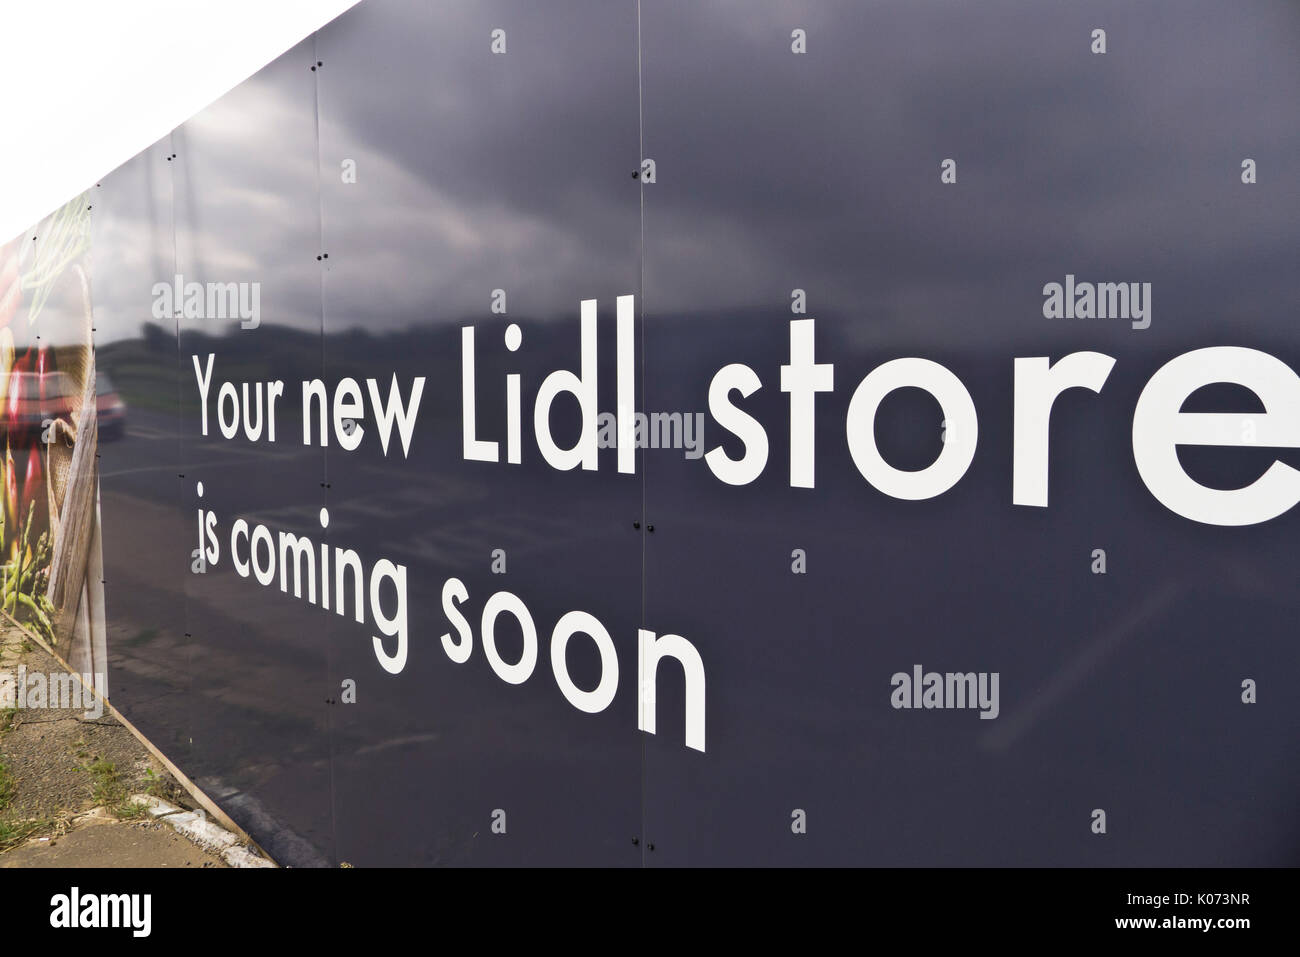 Hoardings around the site of a new Lidl supermarket being developed at Heacham in Norfolk. Stock Photo